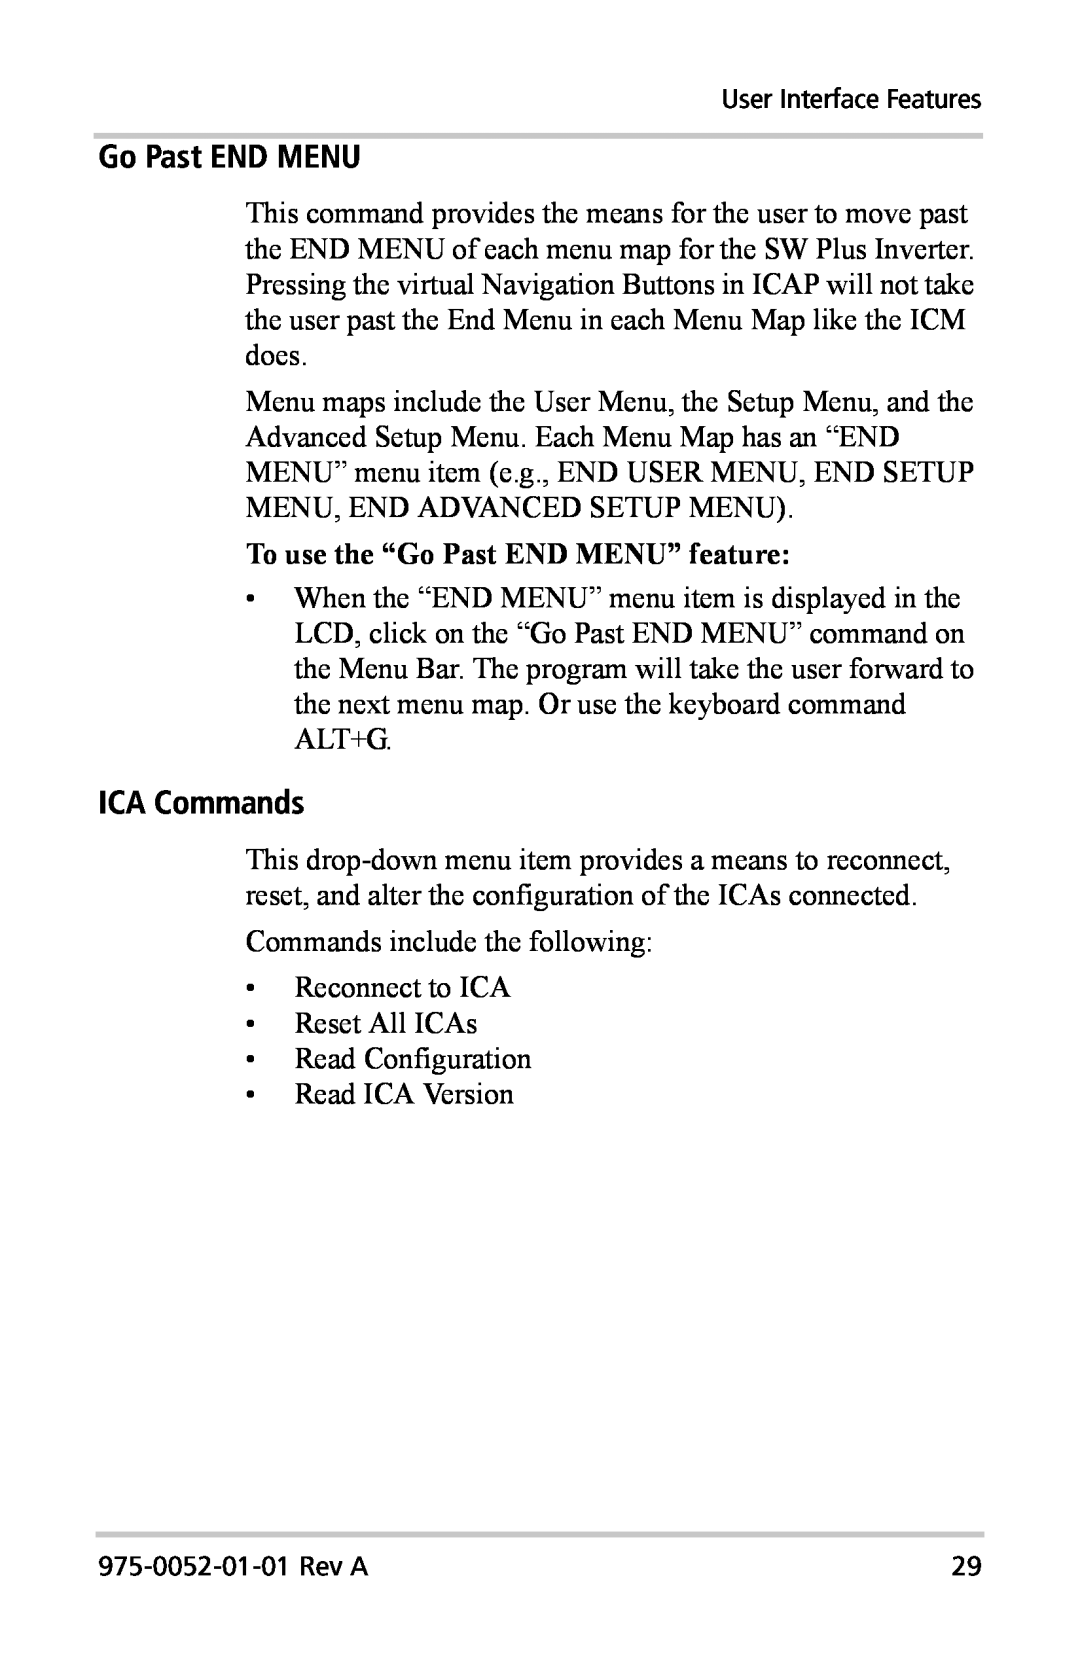 Xantrex Technology Inverter Communications Adapter manual ICA Commands, To use the “Go Past END MENU” feature 